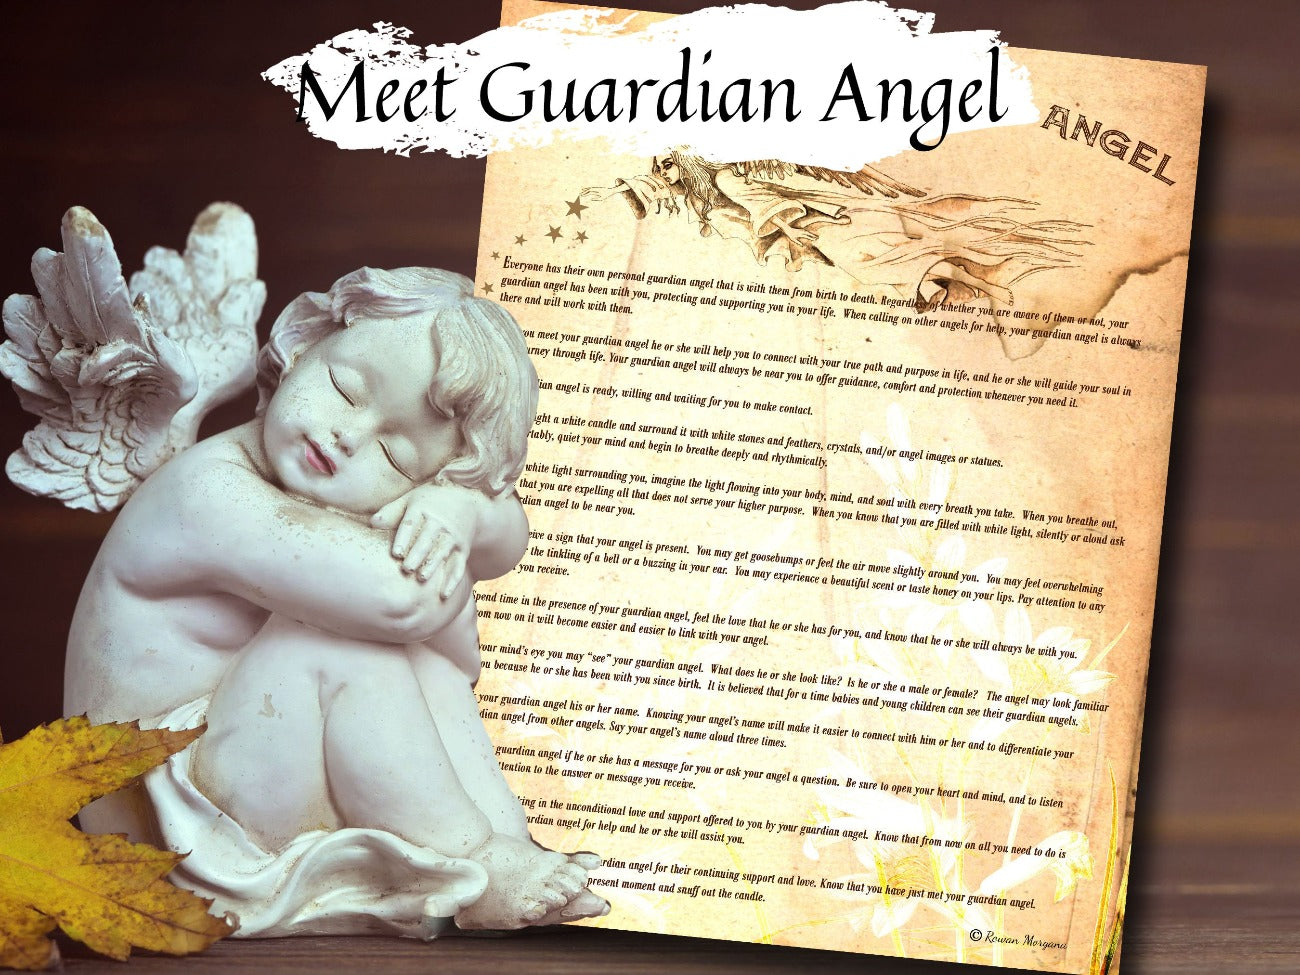 MEET Your GUARDIAN ANGEL a Ritual to Meet Guardian Angel, Wicca Witchcraft, Light Worker Magic, Angel Guidance Folklore, Journal Grimoire Printable - Morgana Magick Spell